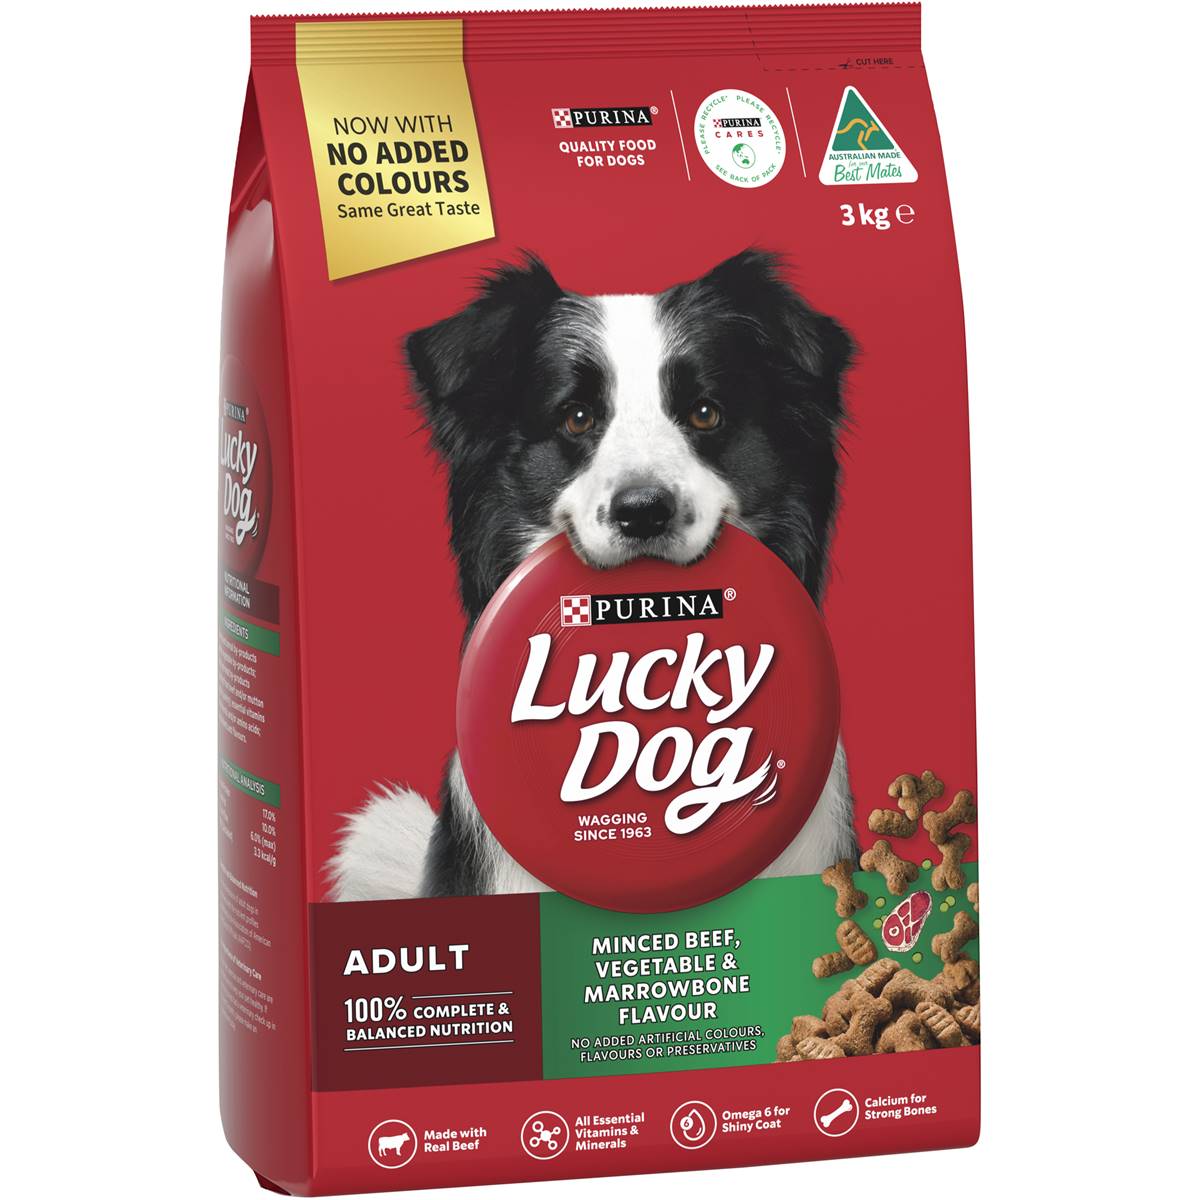 Lucky Dog Adult Minced Beef Vegetable & Marrowbone Dry Dog Food 3kg